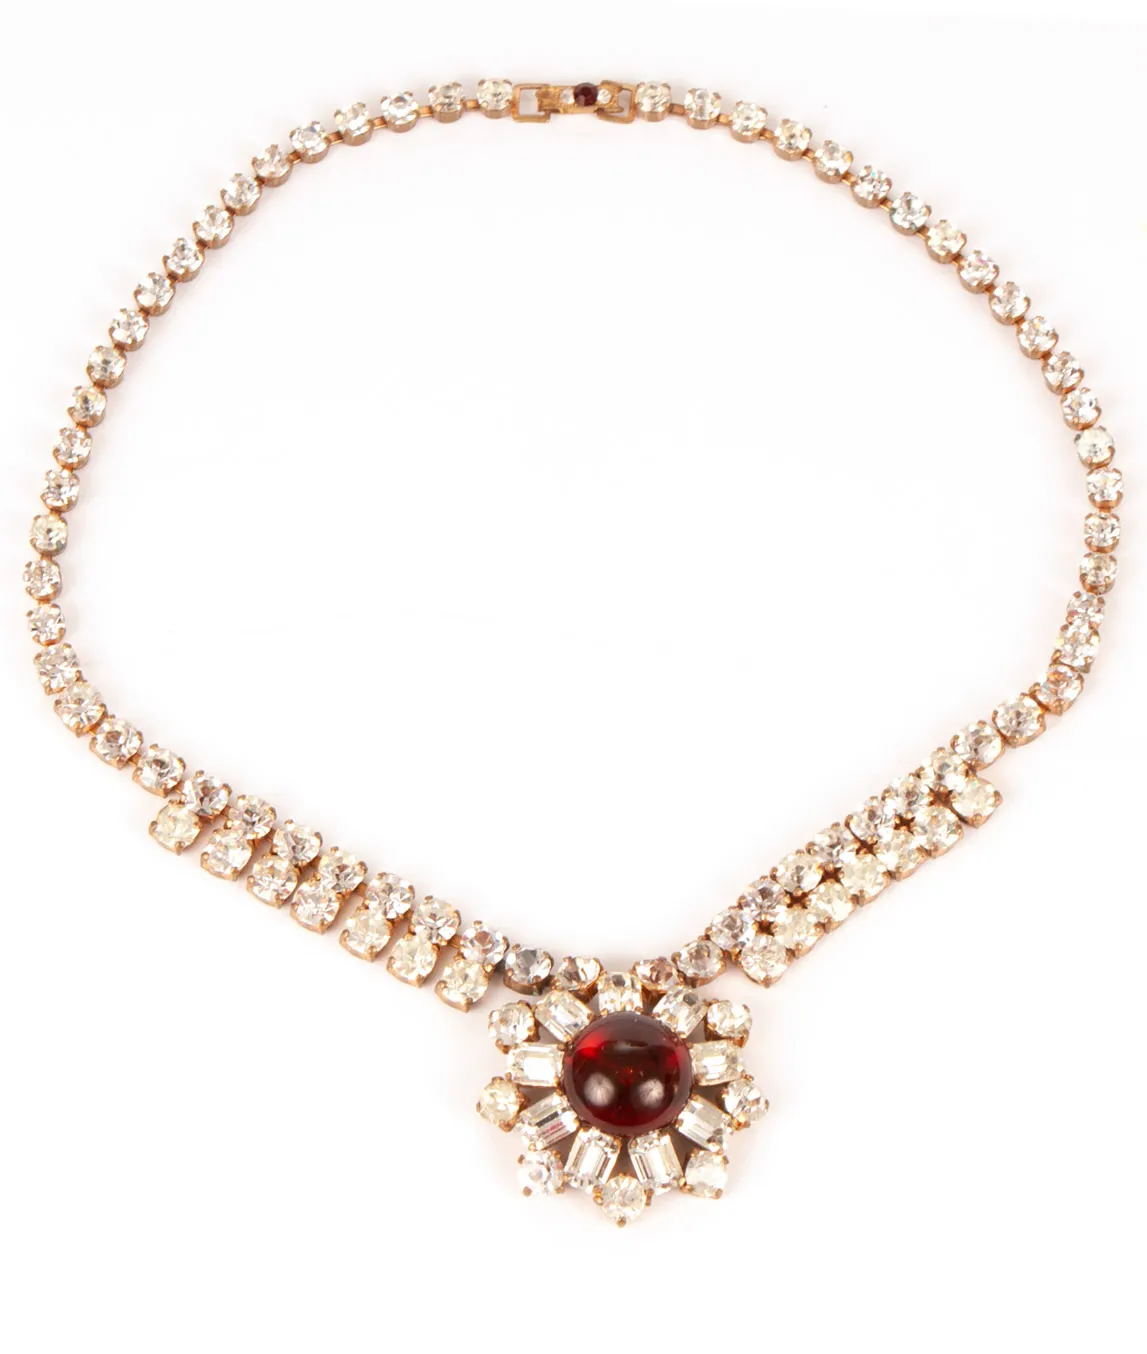 Red crystal and rhinestone necklace by Schoffel